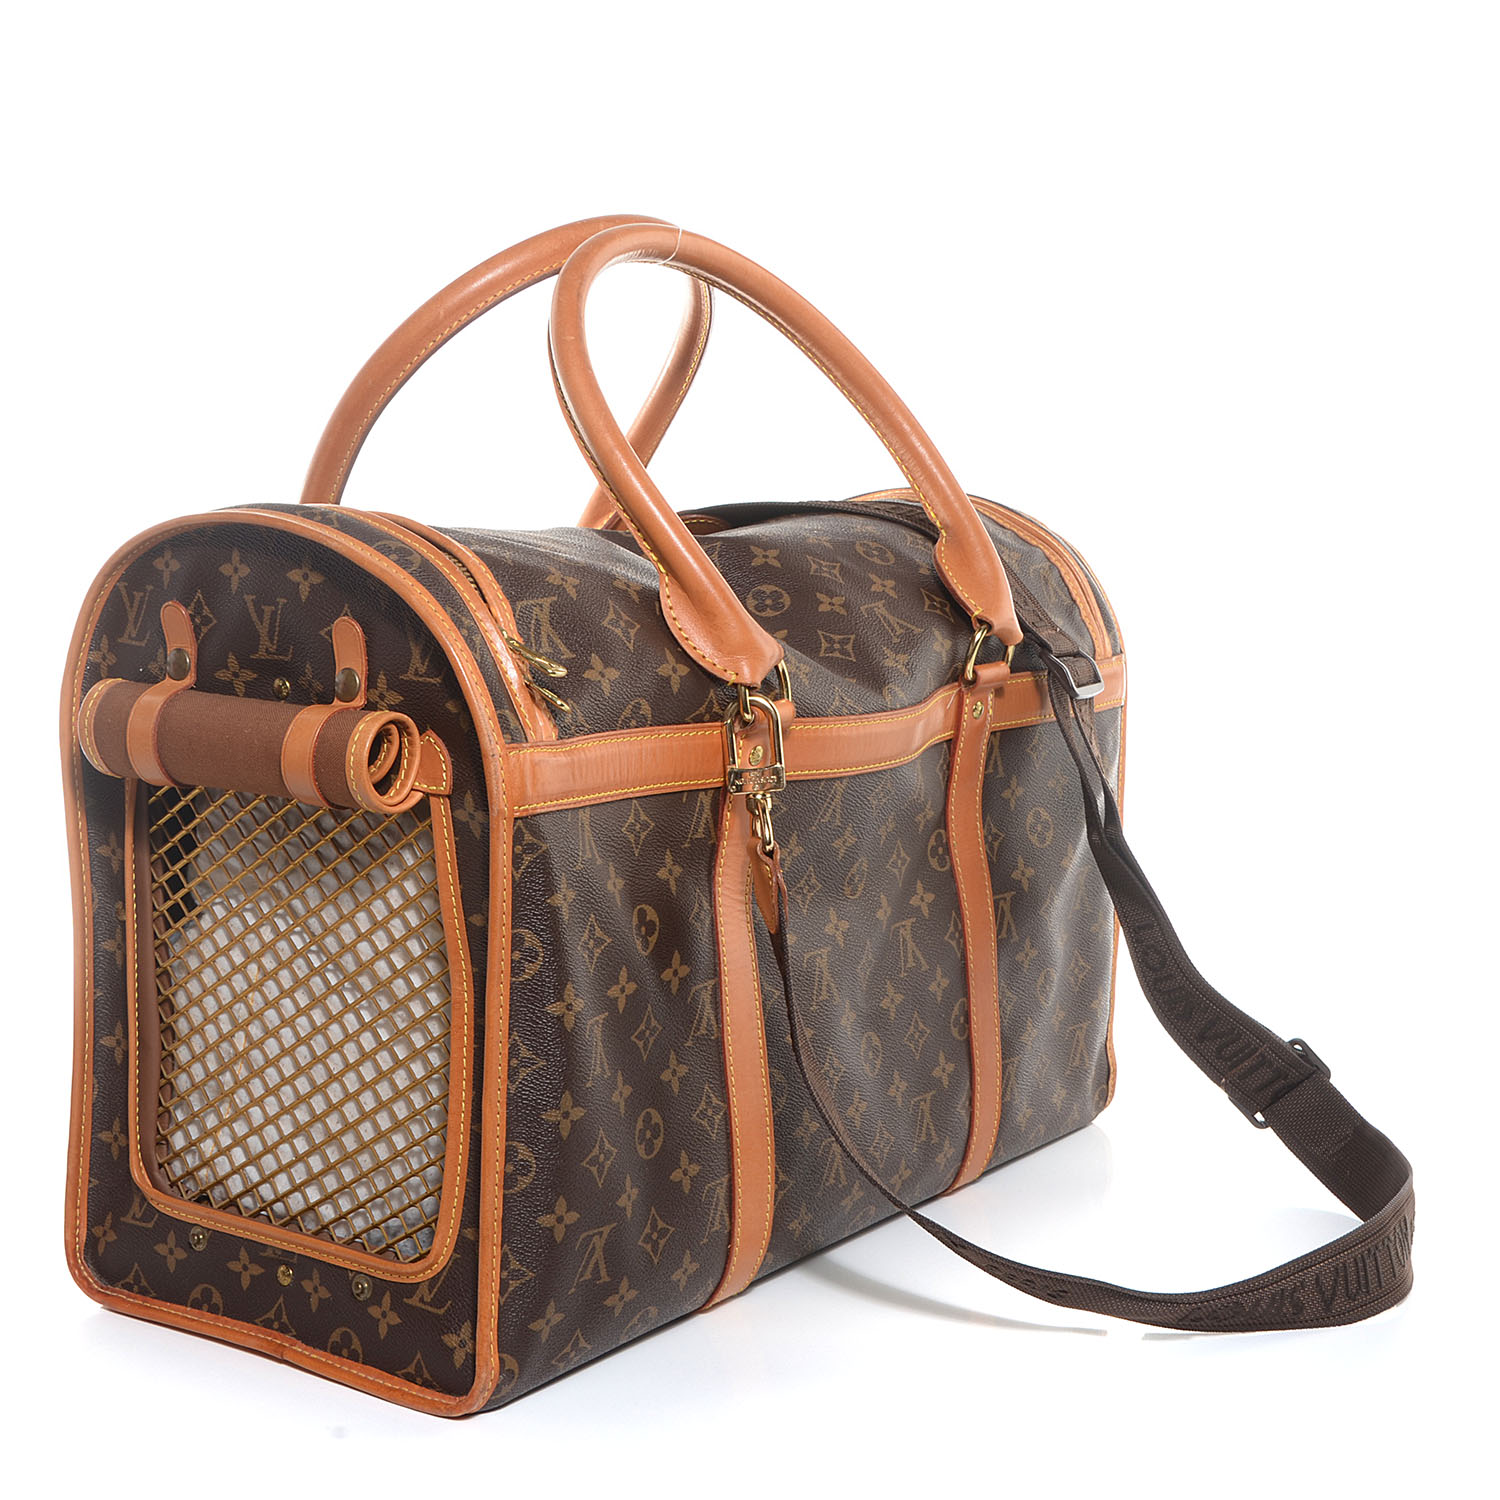 Authentic Louis Vuitton dog carrier , Was used for